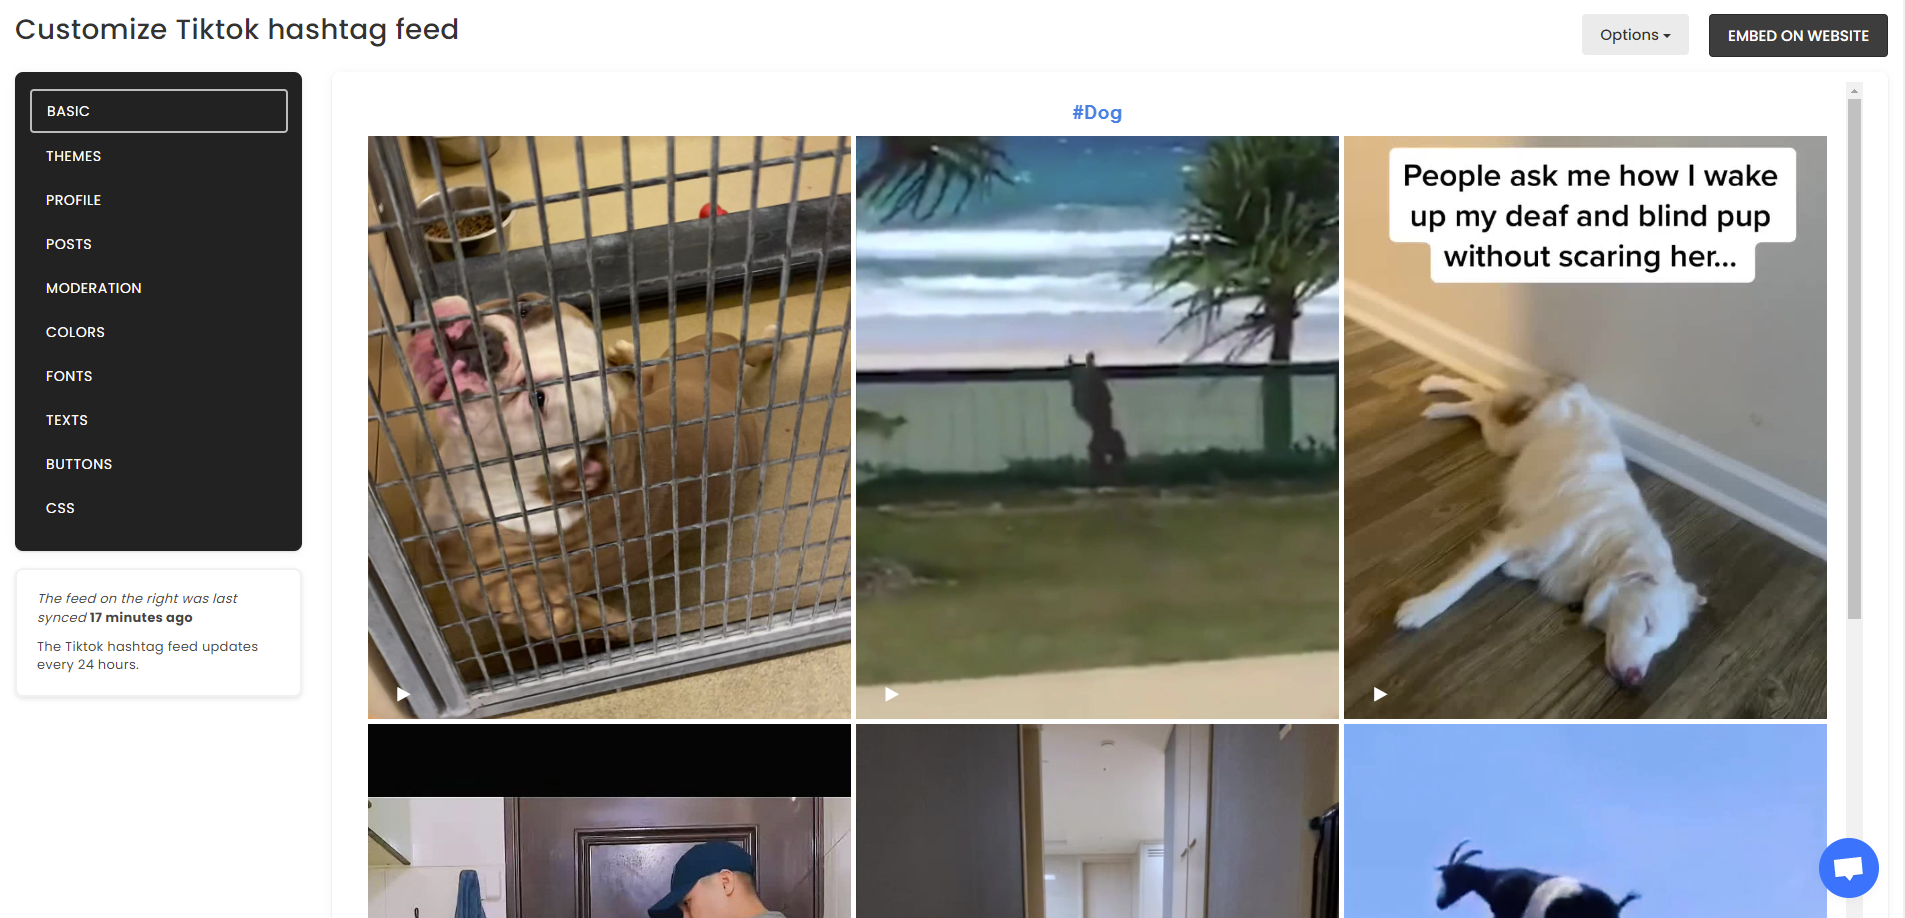 Customize your feed - Free Tiktok Hashtag Feed Widget For Wix Website